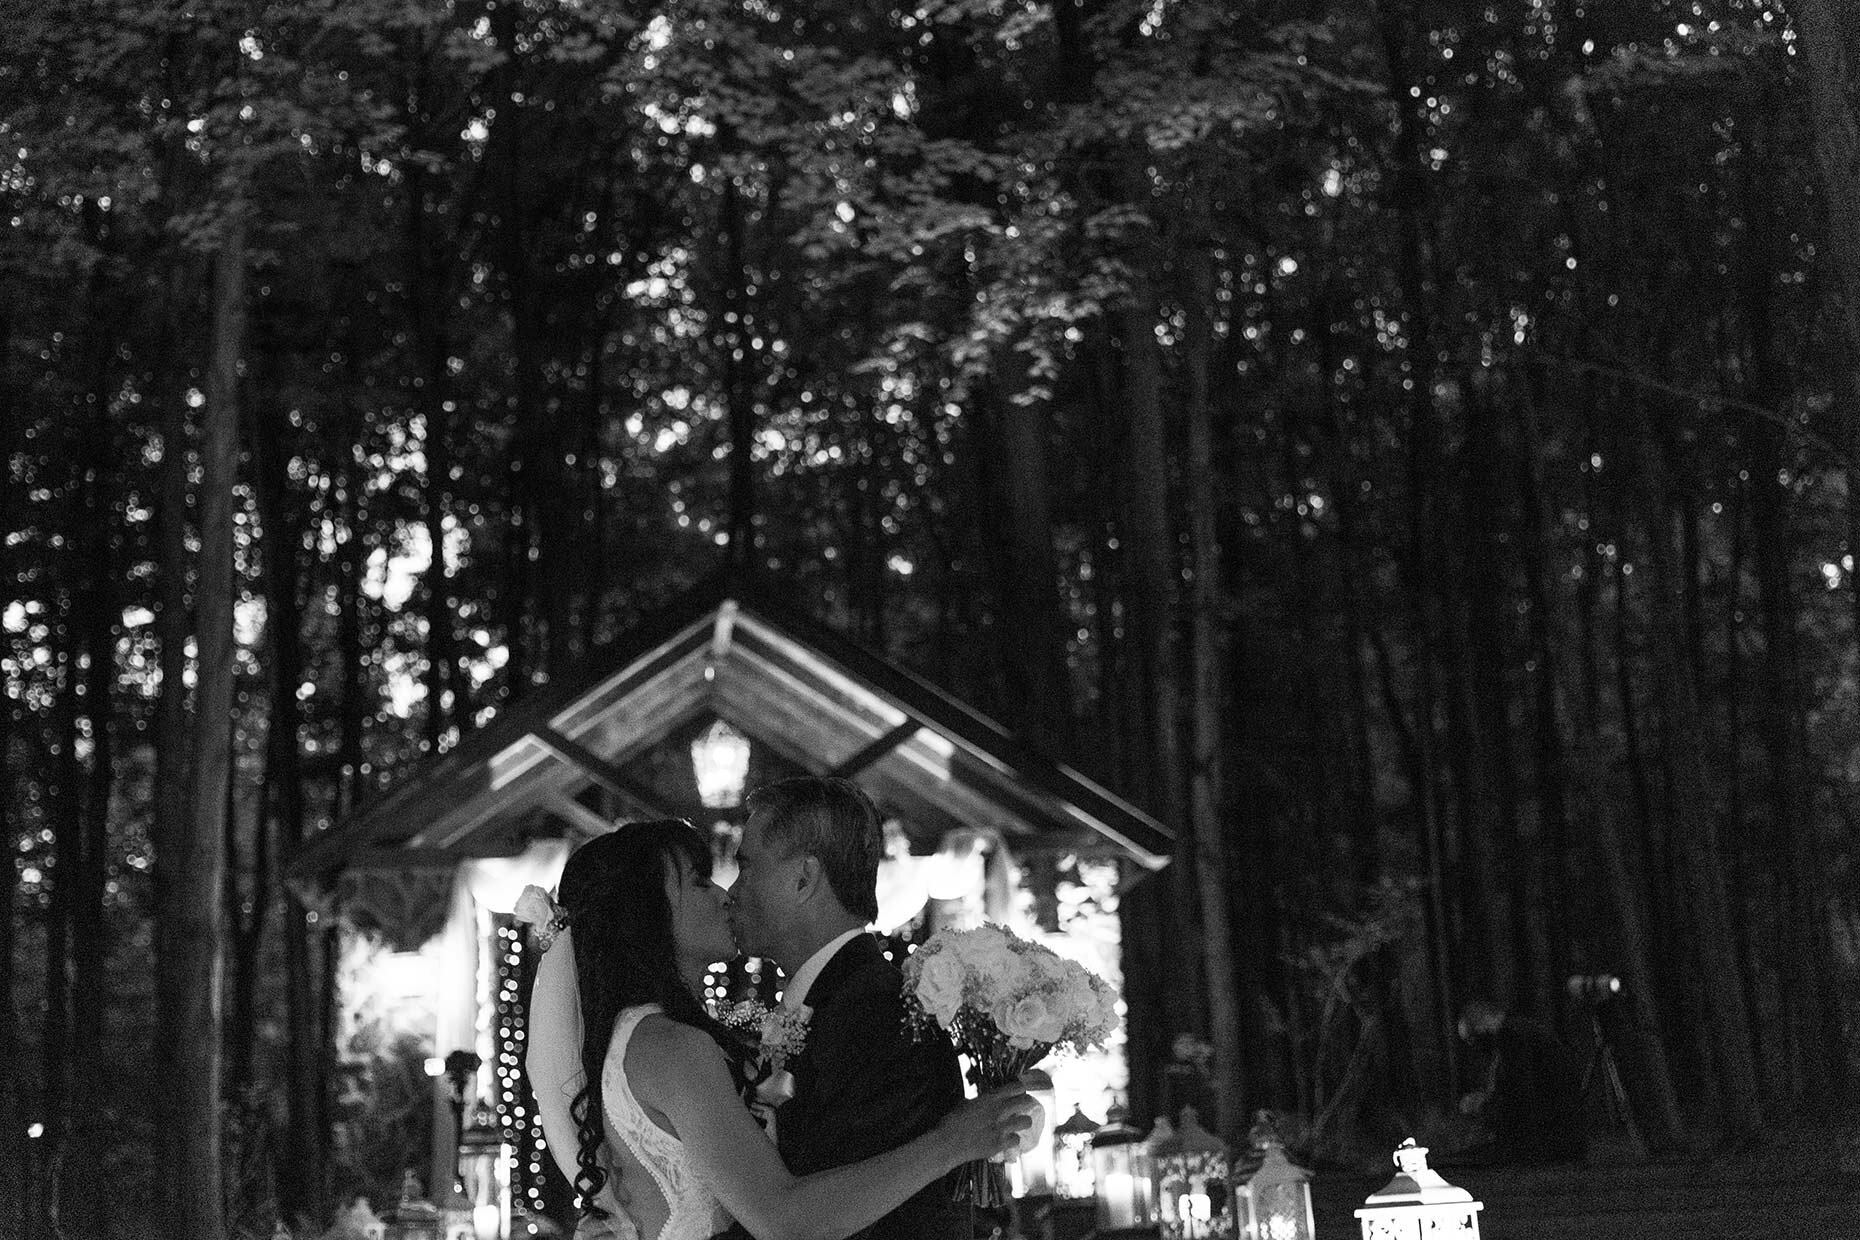 Kiss in the woods in black and white